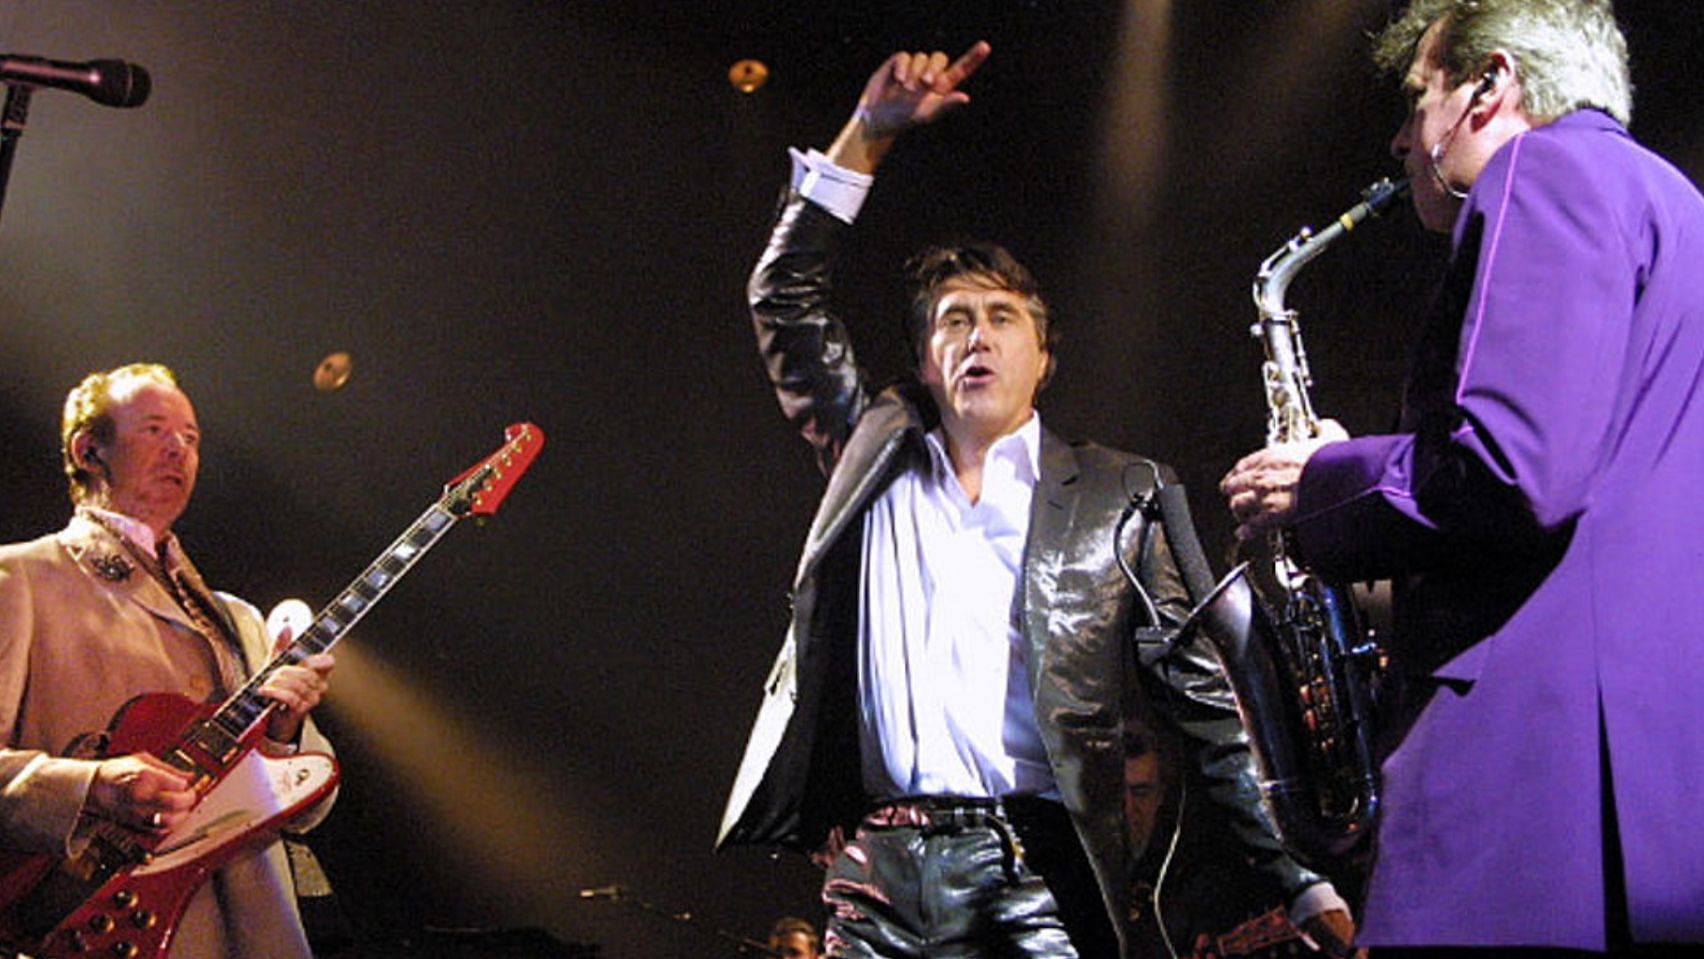 Roxy Music Tour 2022 tickets Presale, where to buy, dates, and more